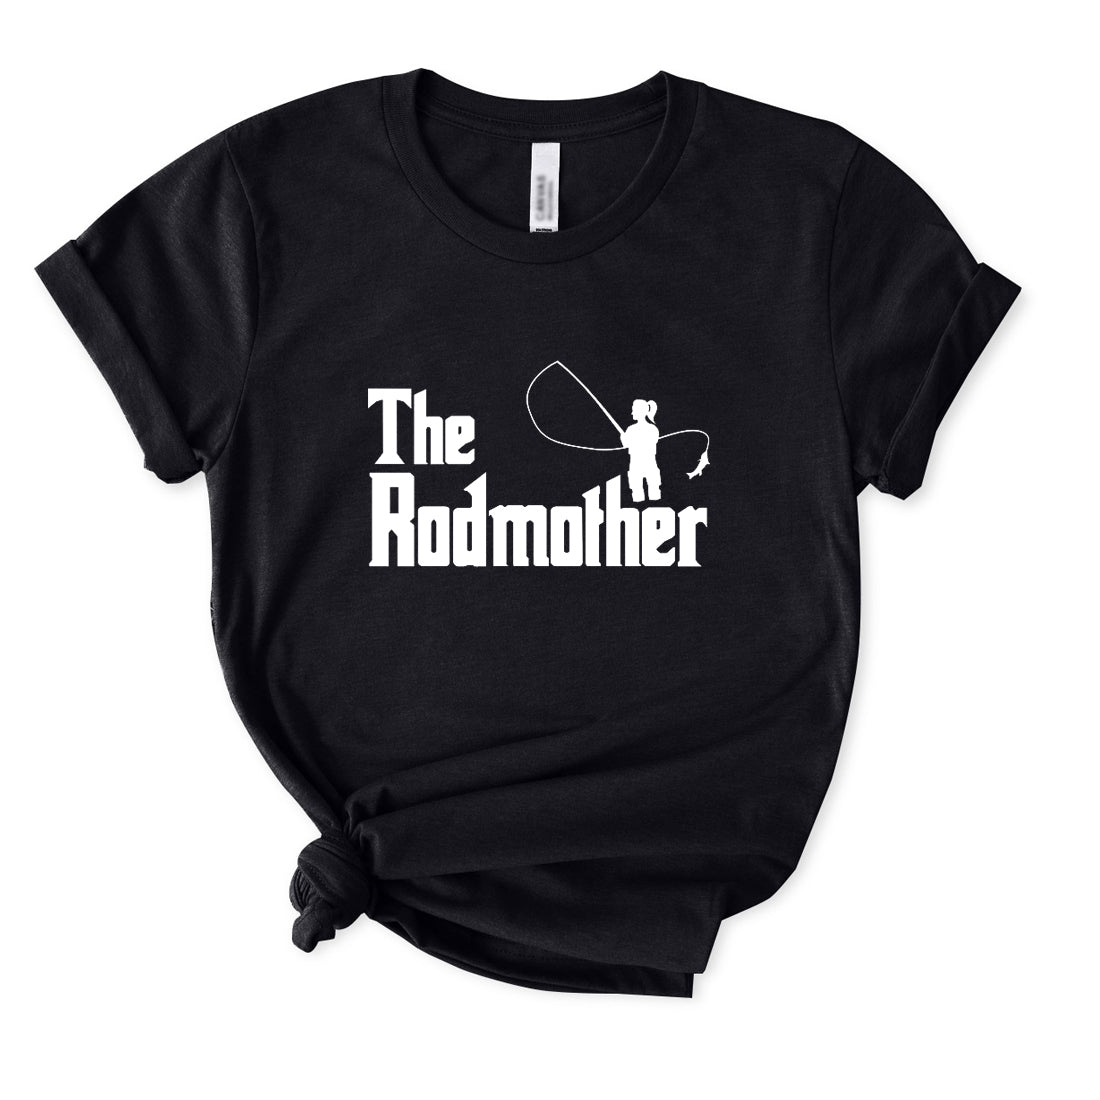 The Rodmother T-Shirt for Women